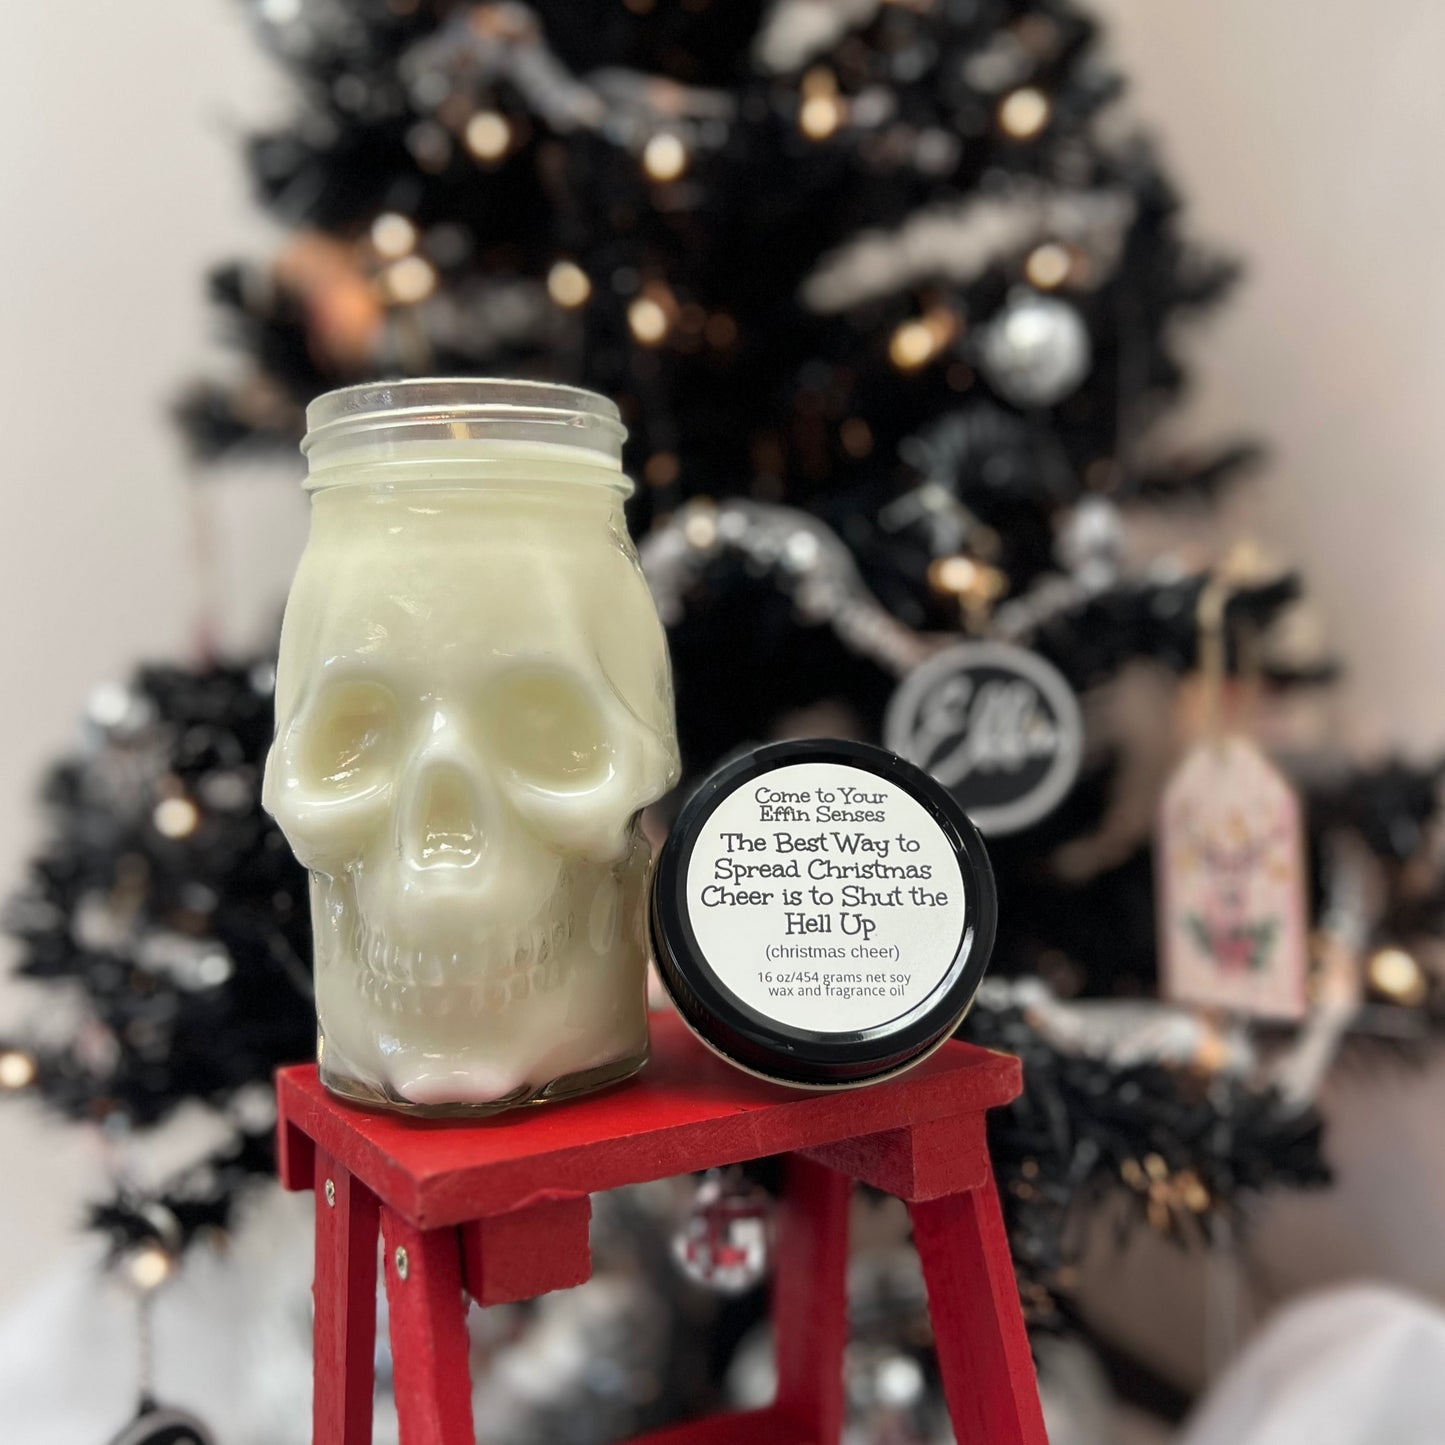 The Best Way to Spread Christmas Cheer is to Shut the Hell Up: Skull